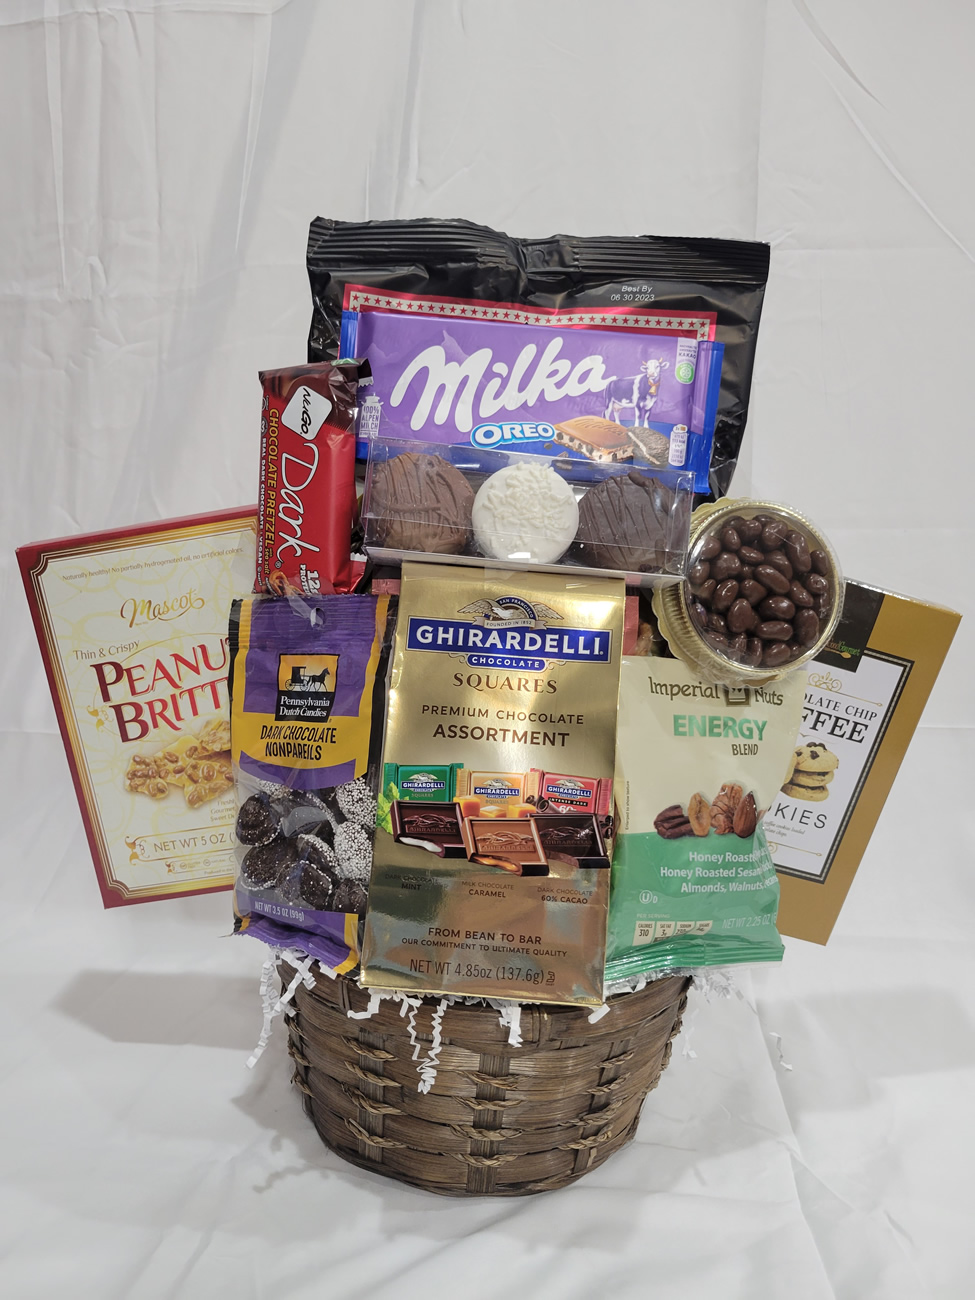 The Sweet and Savory Snack Basket